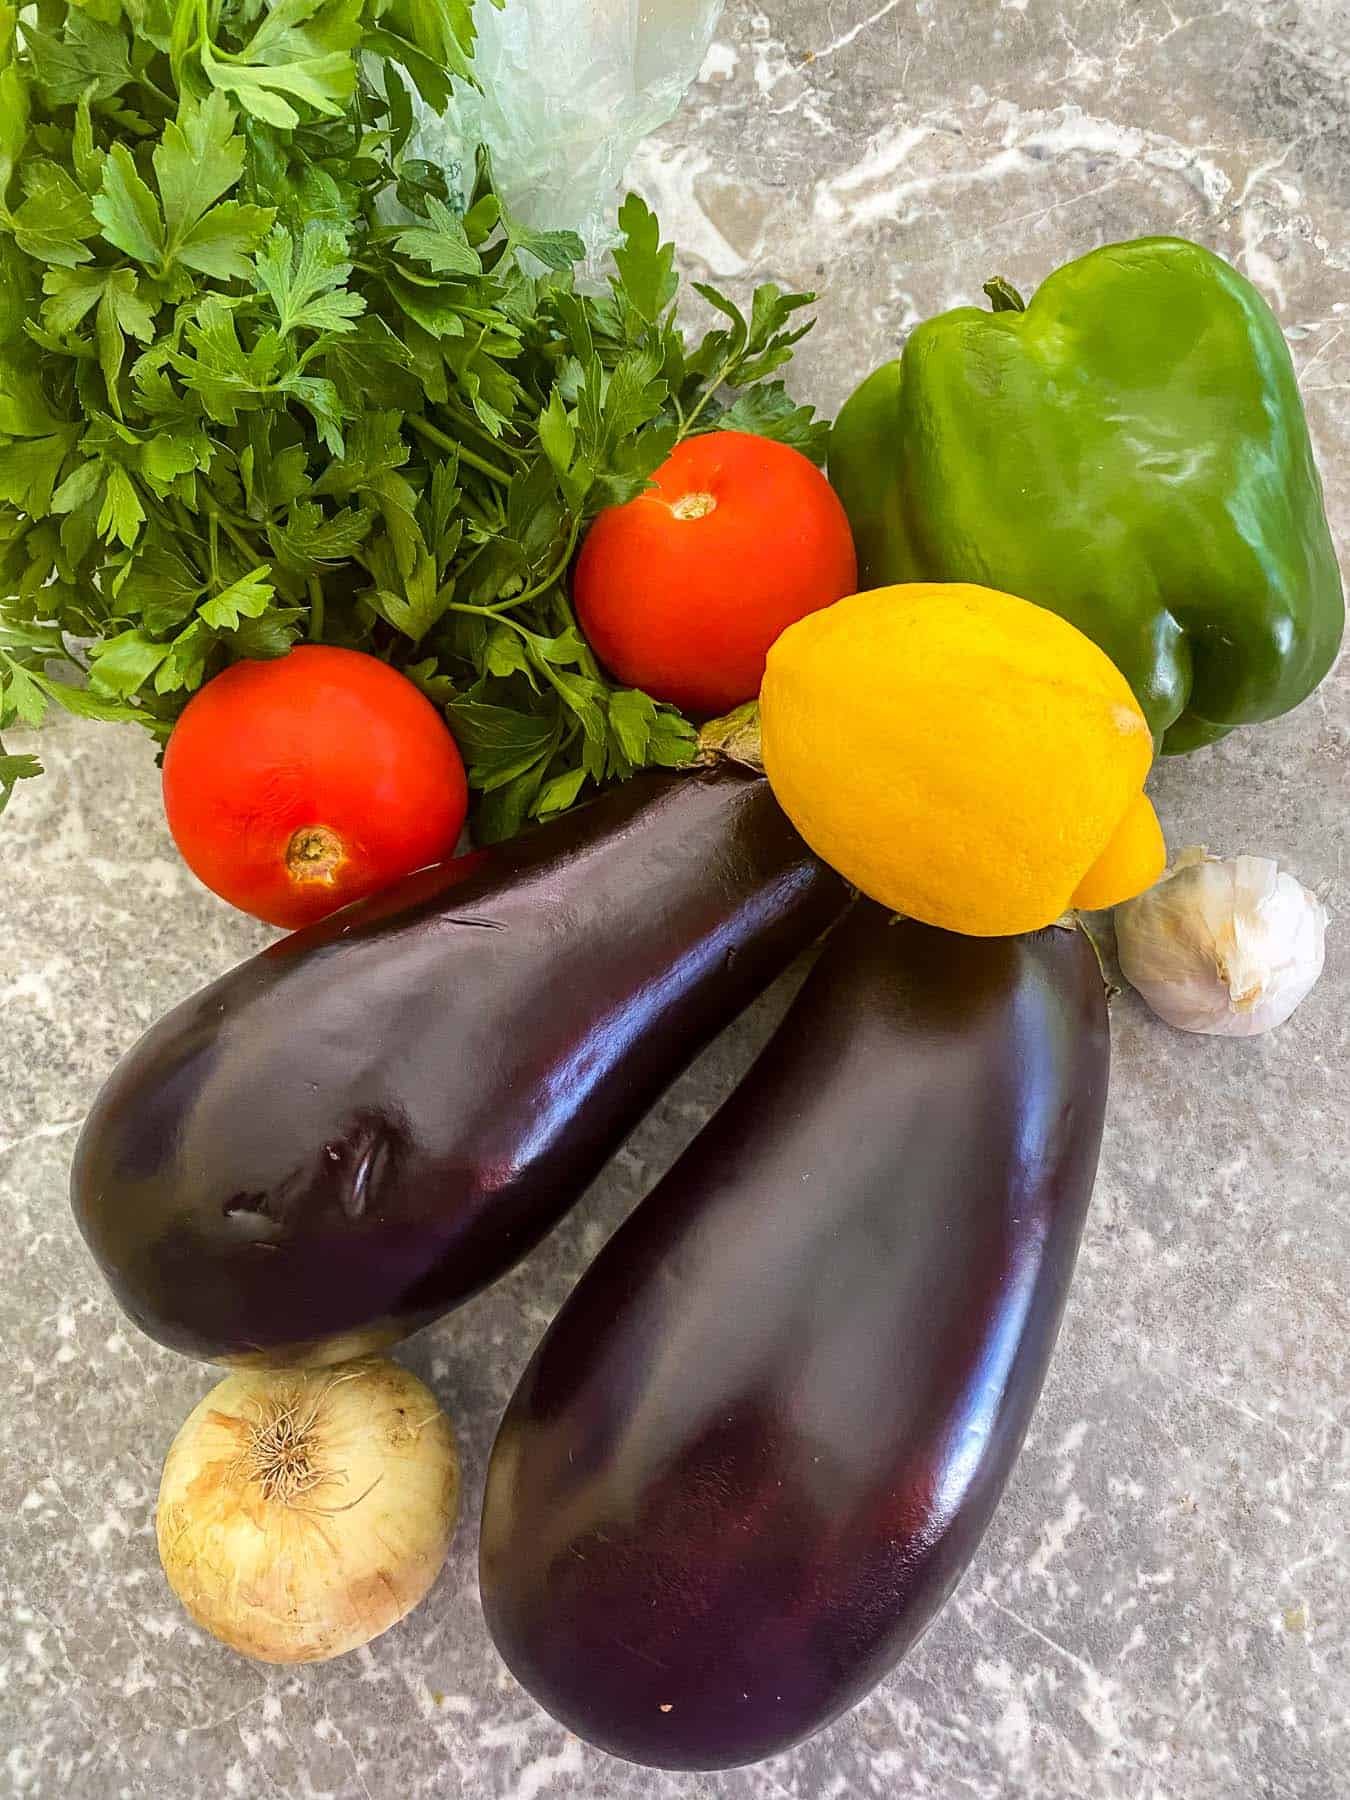 Fresh ingredients used to make the relish: eggplants, bell pepper, tomatoes, parsley, lemon, onion and garlic. Other ingredients like olive oil or seasonings are not shown in the picture. 